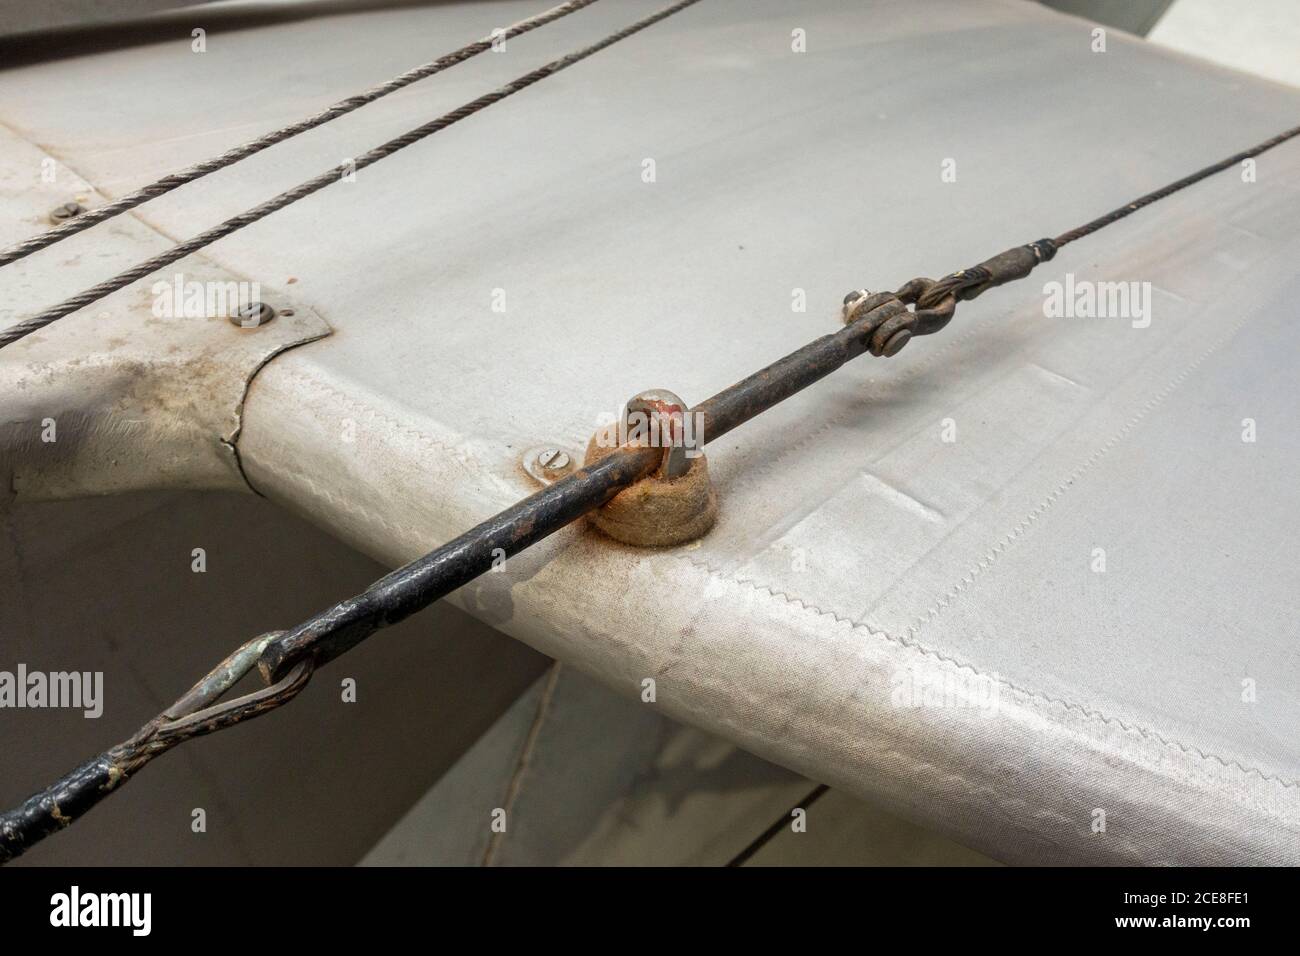 Detail of wires connected to rear flaps on a De Havilland DH 82A Tiger Moth on display in the De Havilland Museum, London Colney, UK. Stock Photo